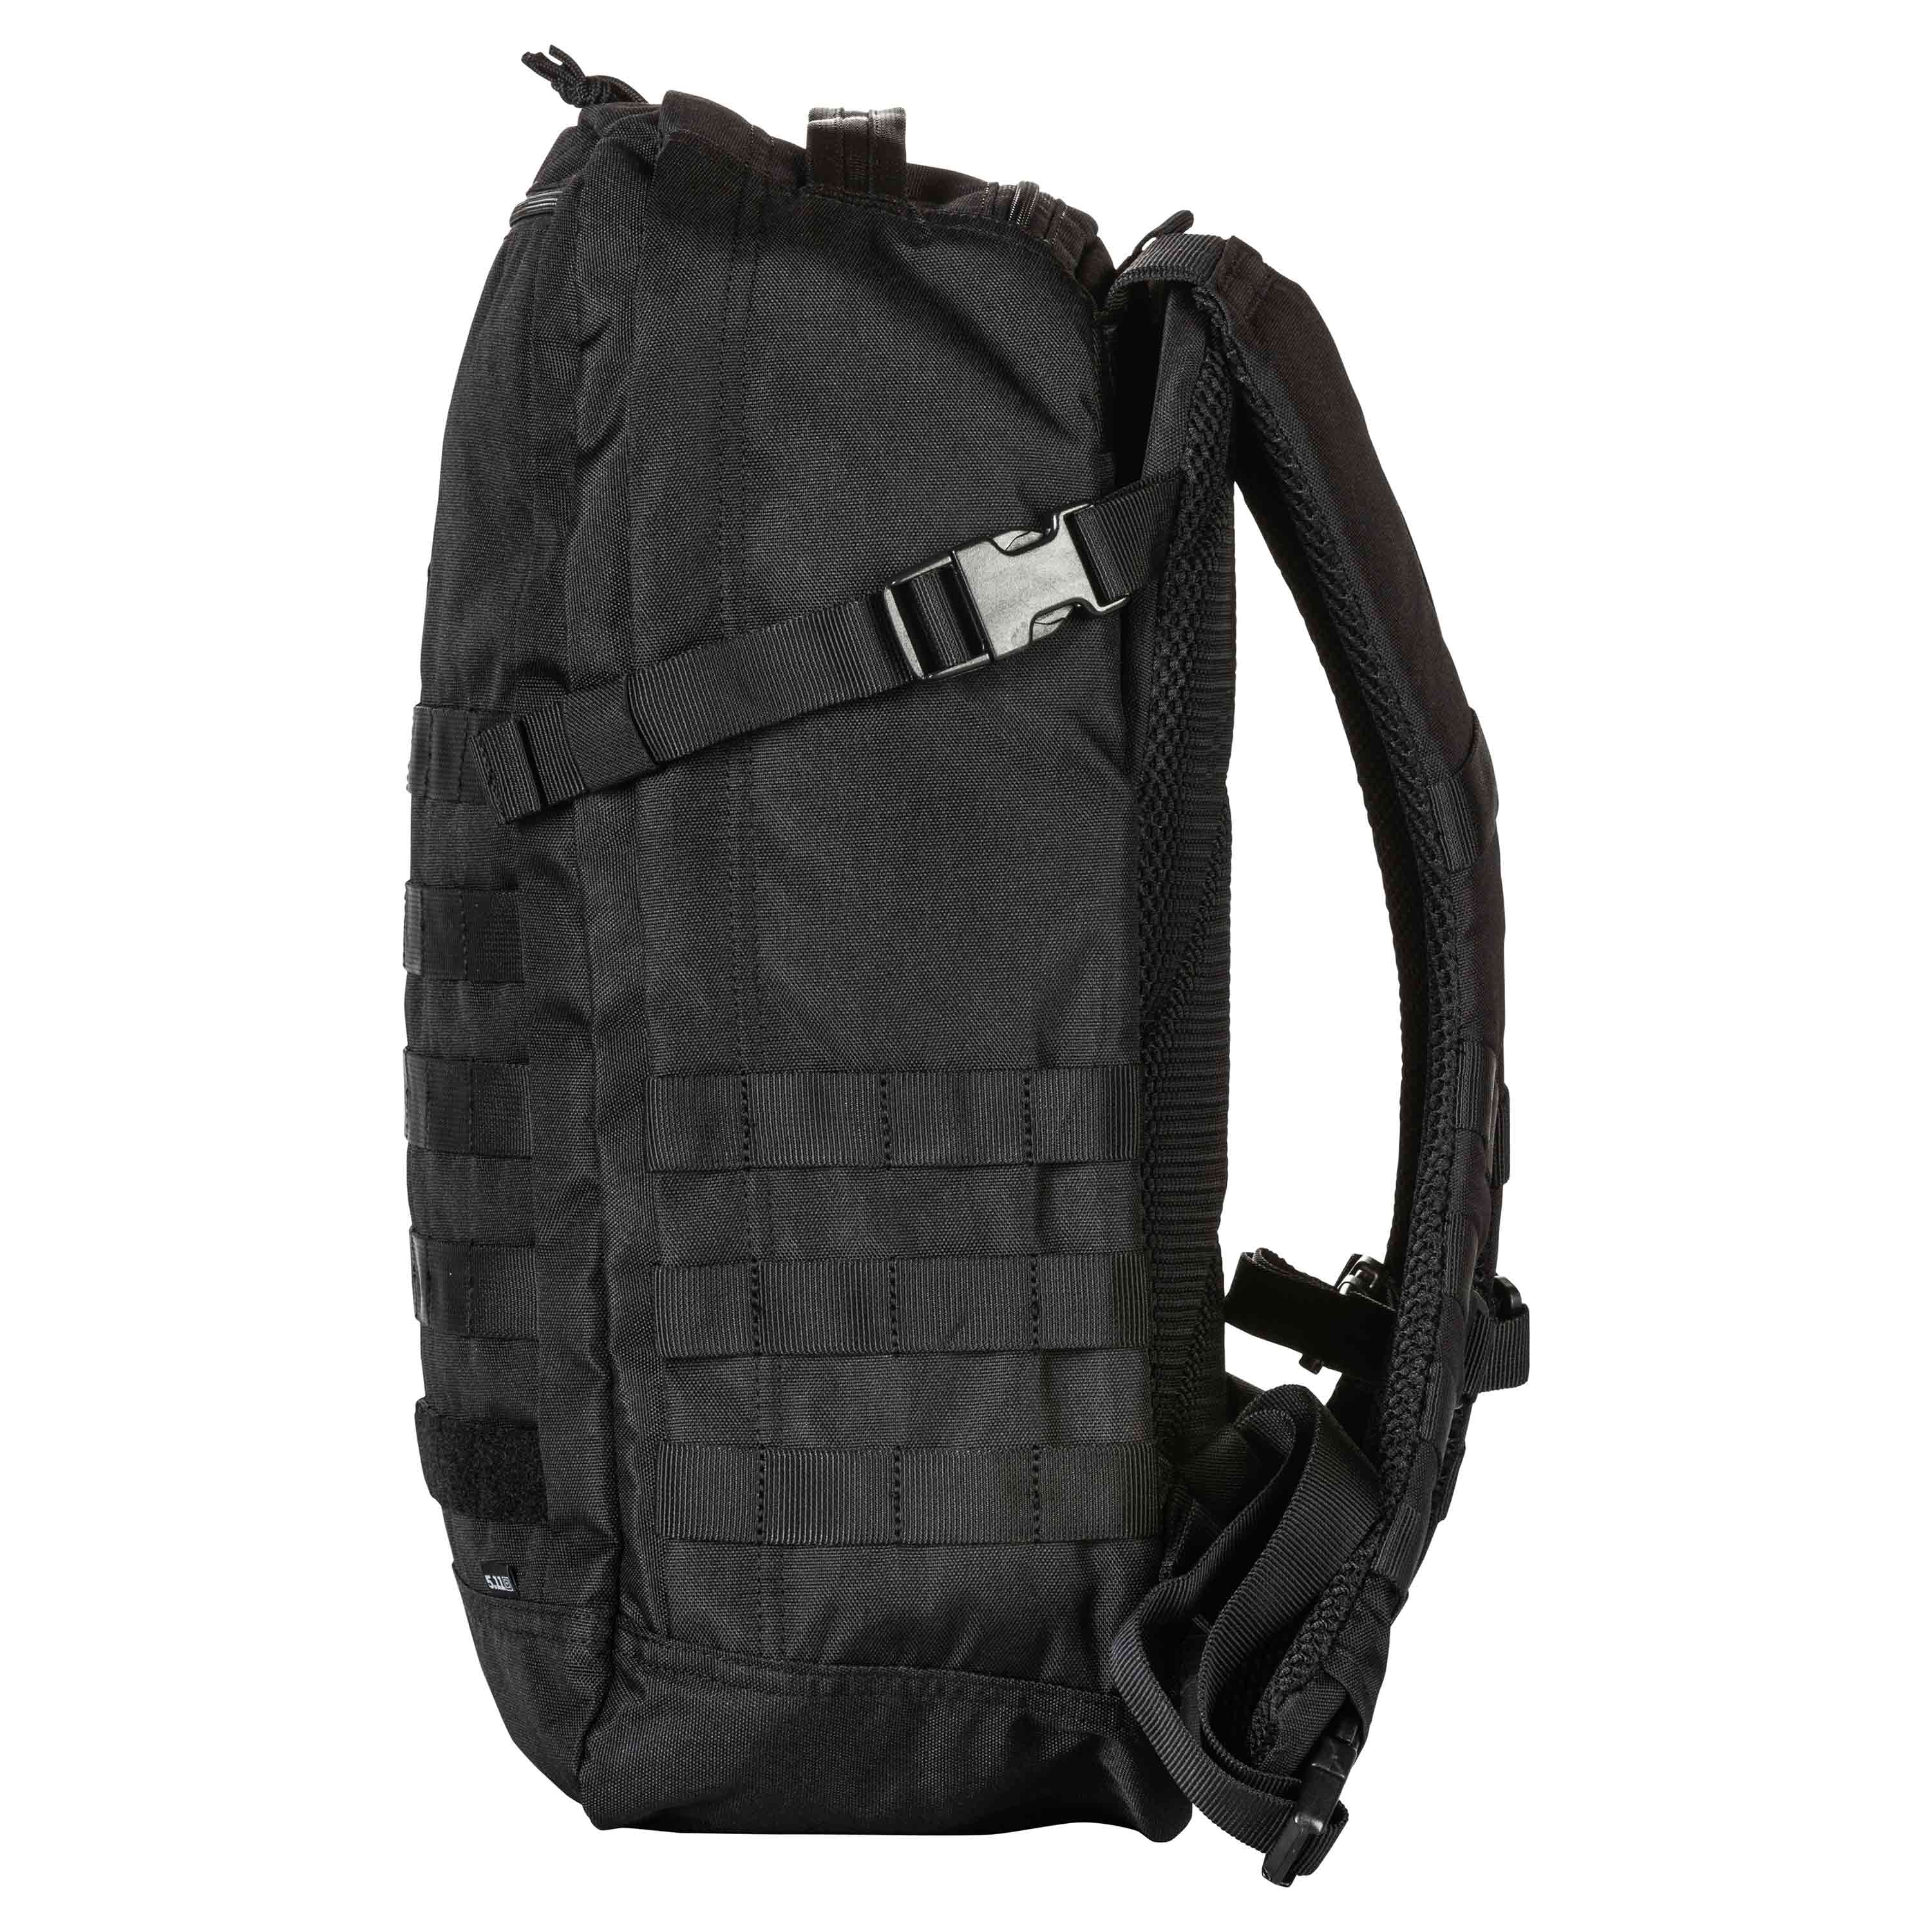 Purchace the 5.11 Rapid Origin Backpack black by ASMC